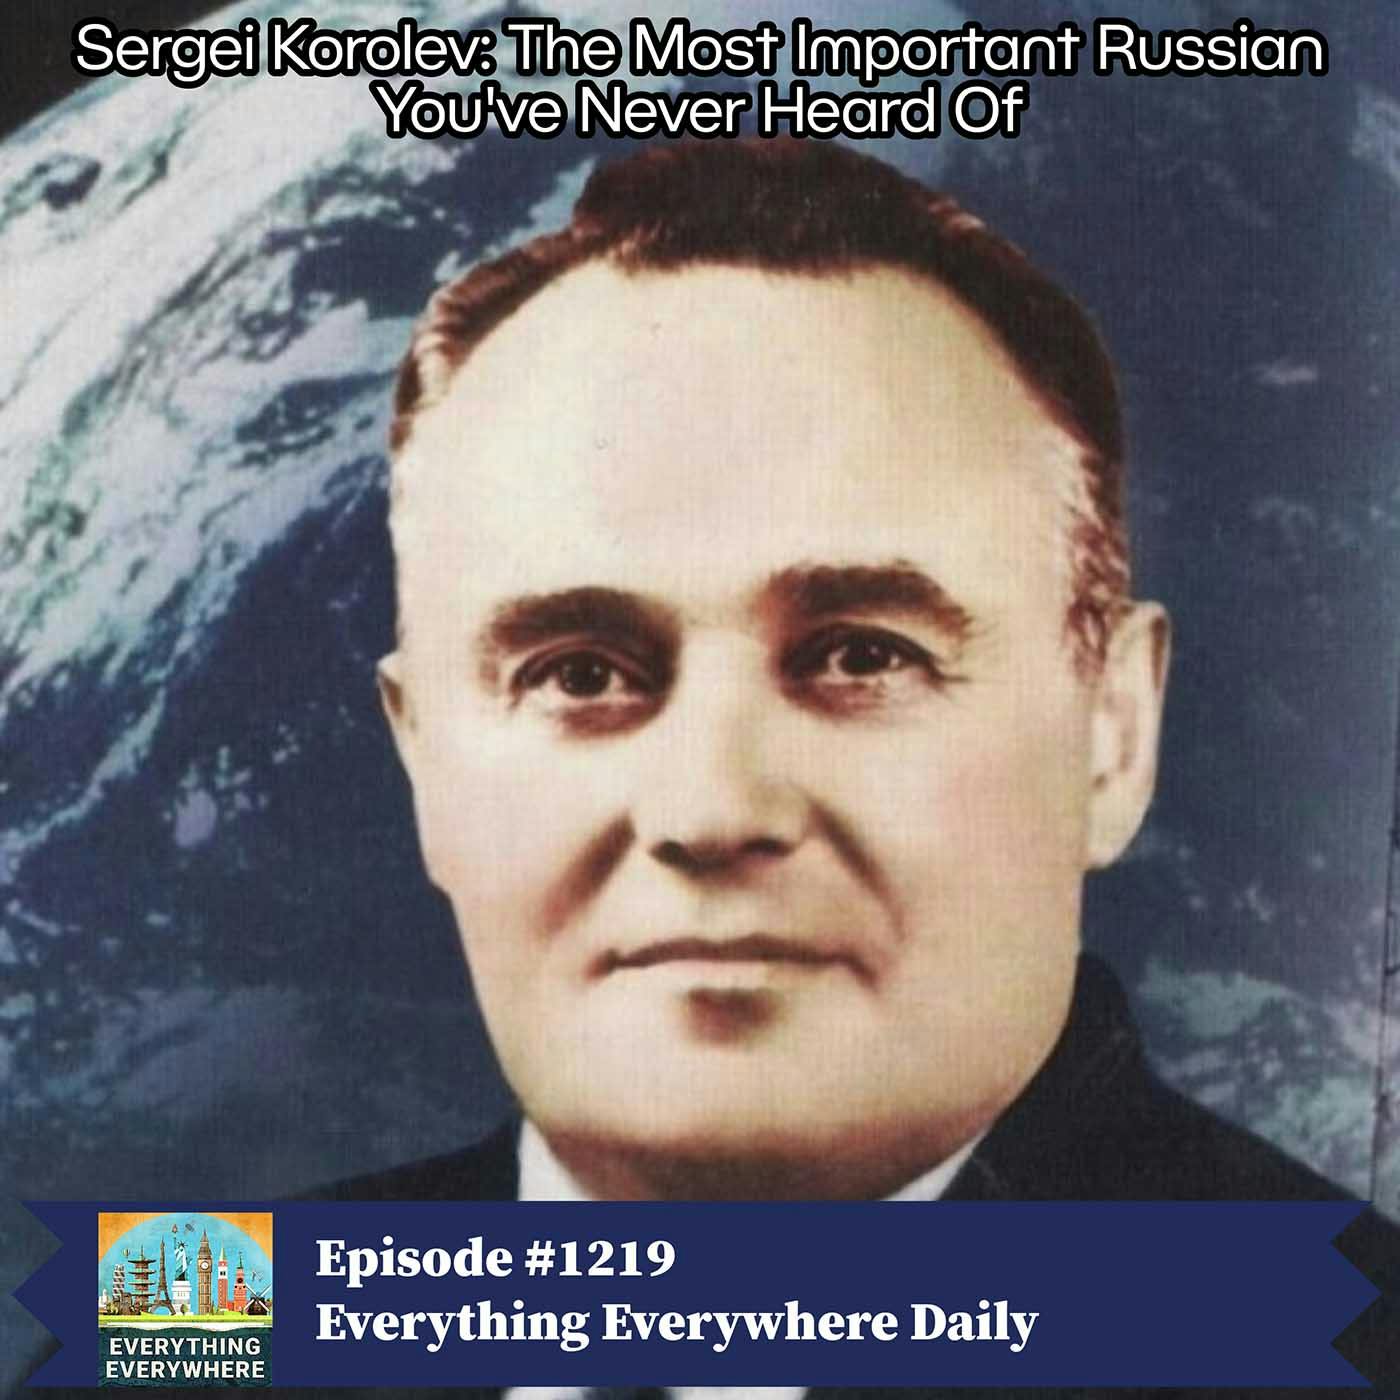 Sergei Korolev: The Most Important Russian You’ve Never Heard Of